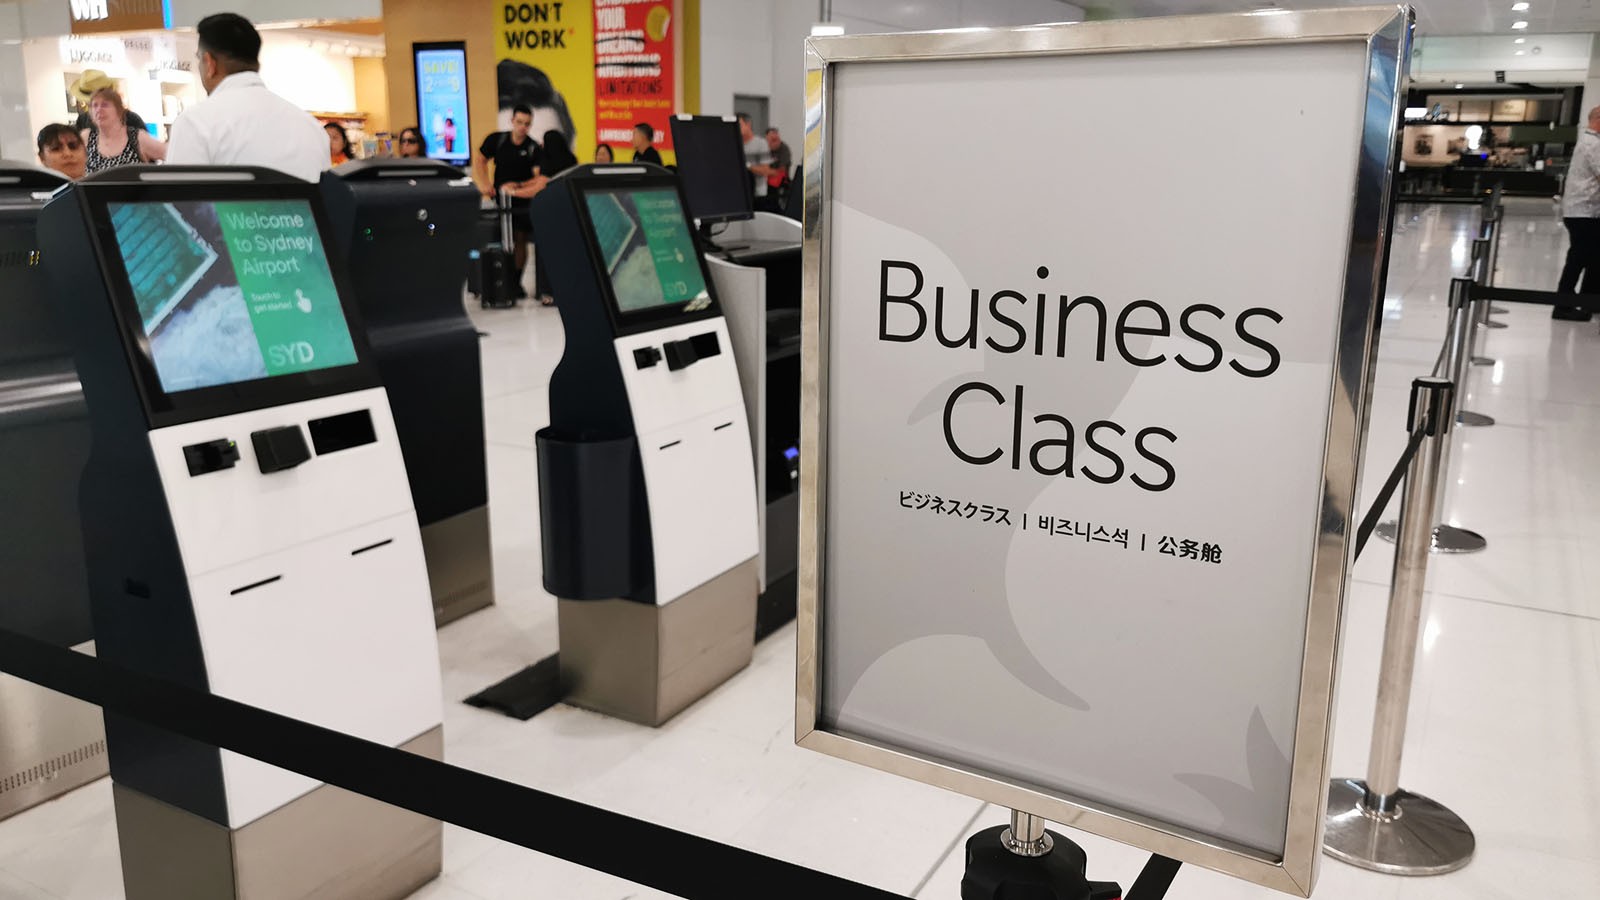 Hawaiian Airlines Business Class check-in zone